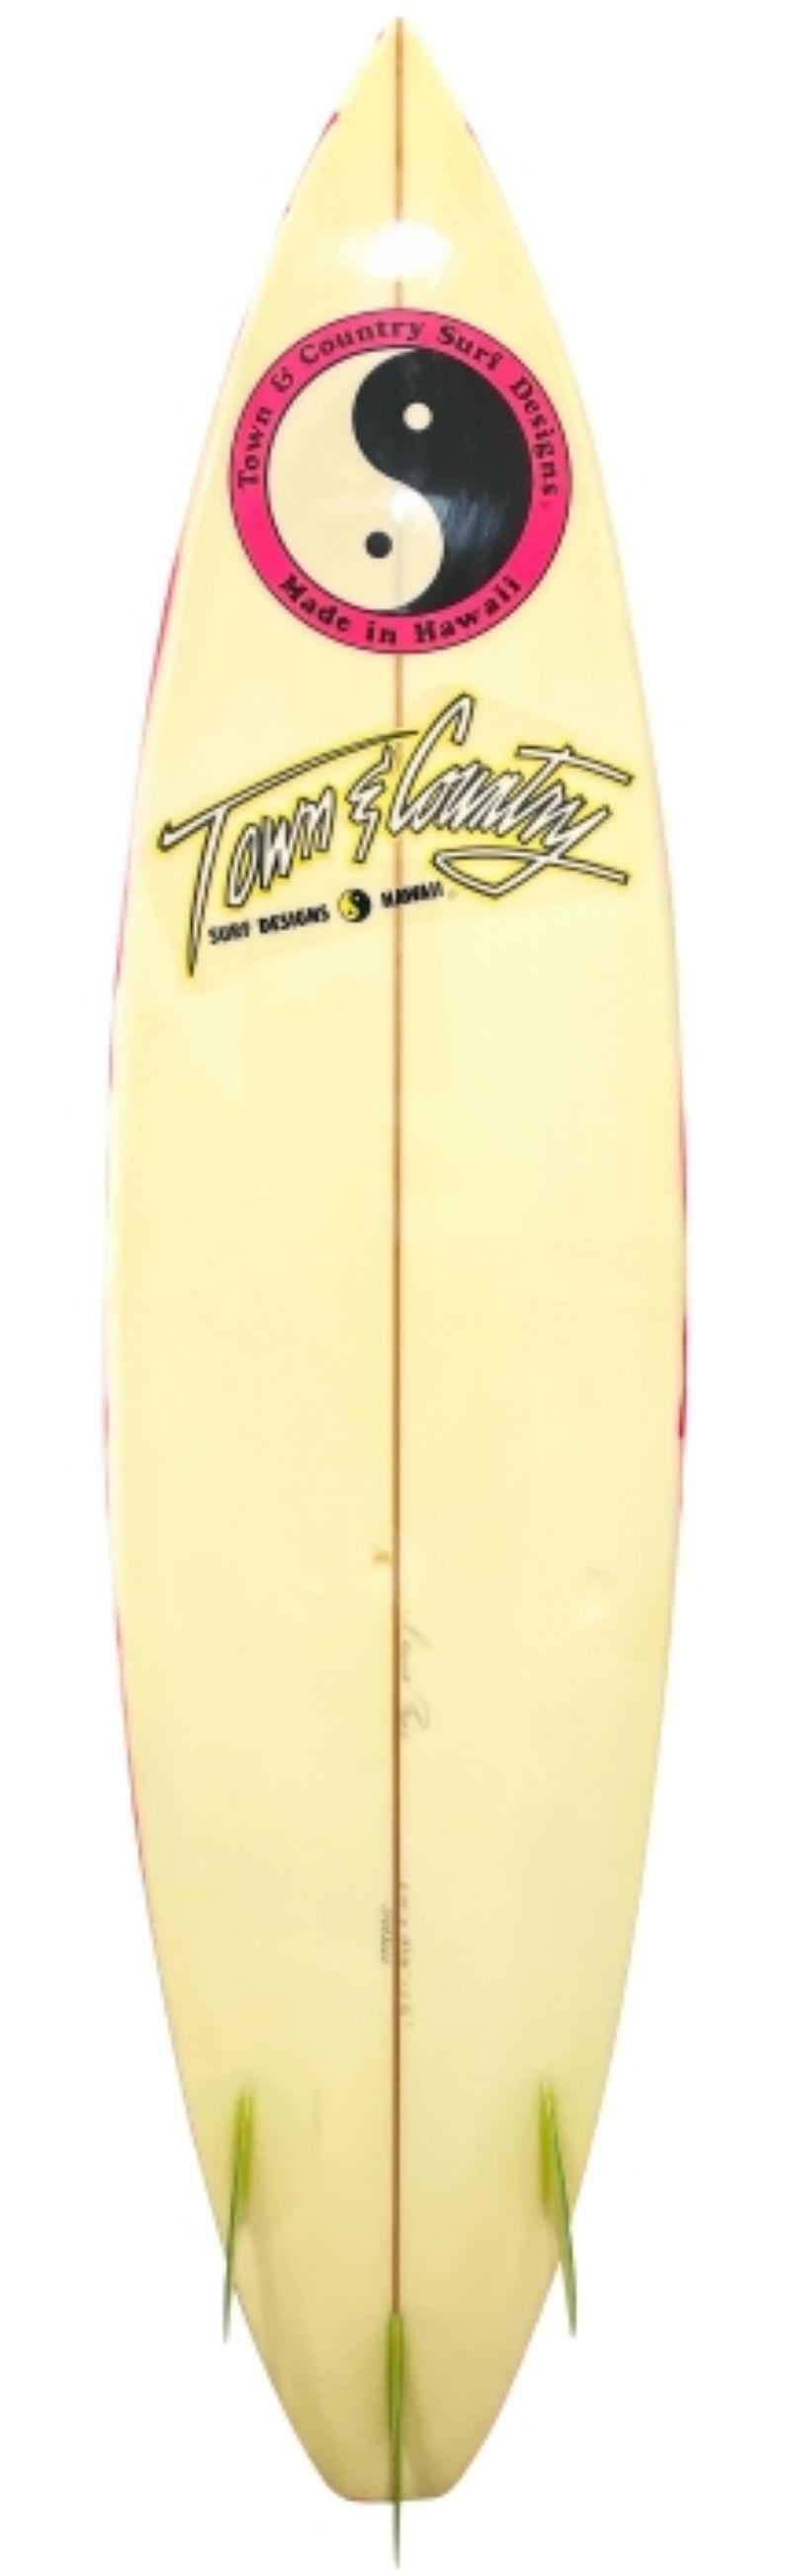 1989 Town & Country surfboard shaped by Dennis Pang. Features an uncommon hand-brushed paint design with translucent yellow glassed on thruster (tri-fin) setup. This is an extremely rare find due to the near mint original condition the board remains